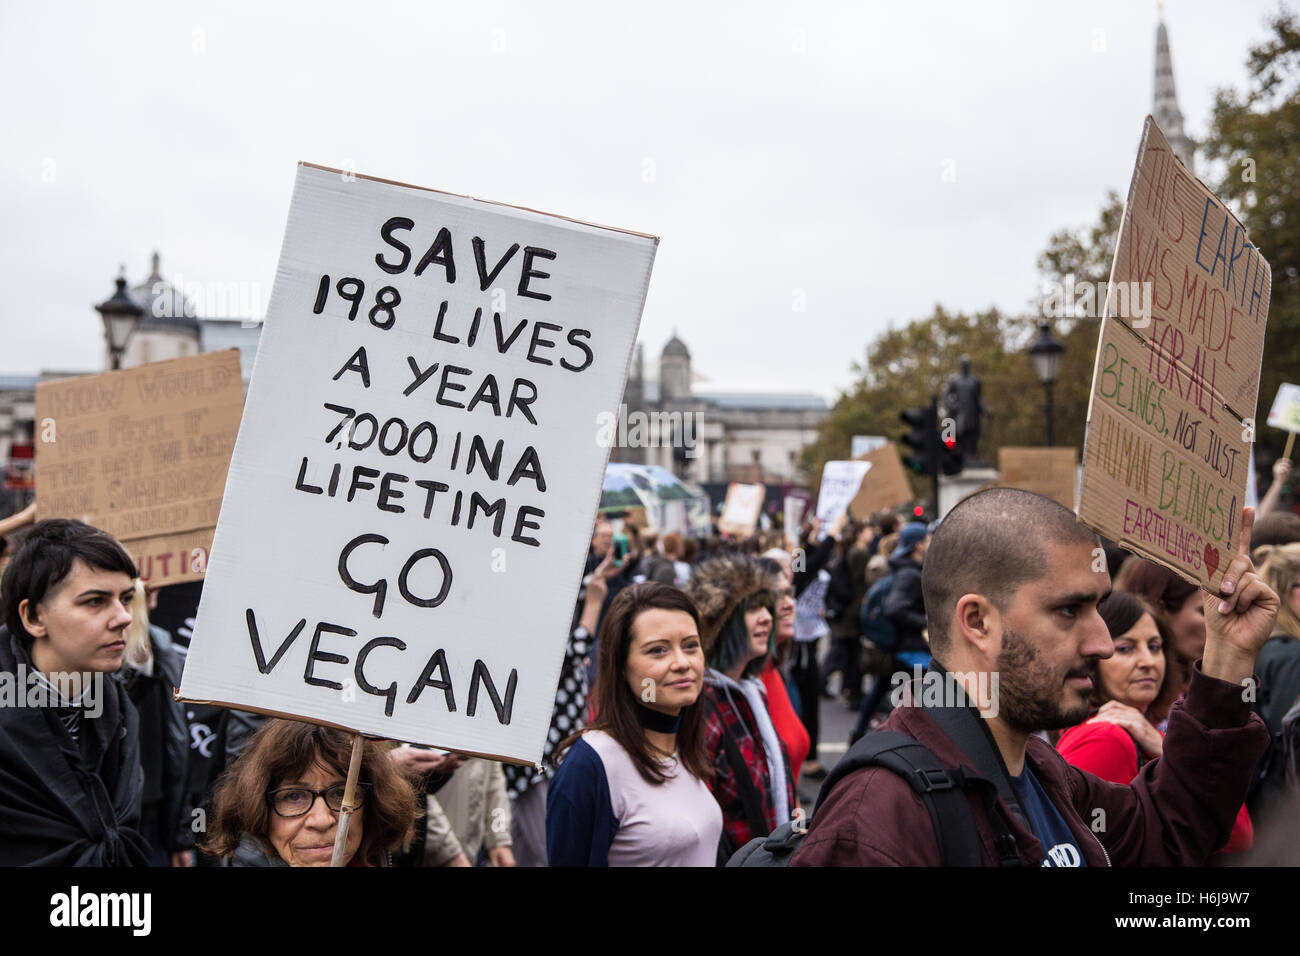 London, UK. 29th October, 2016. Animal rights activists march through Trafalgar Square en route to Parliament to demand that politicians and companies end the exploitation and killing of animals for the benefit of human beings. The march was organised by creative activism collective Surge. Stock Photo